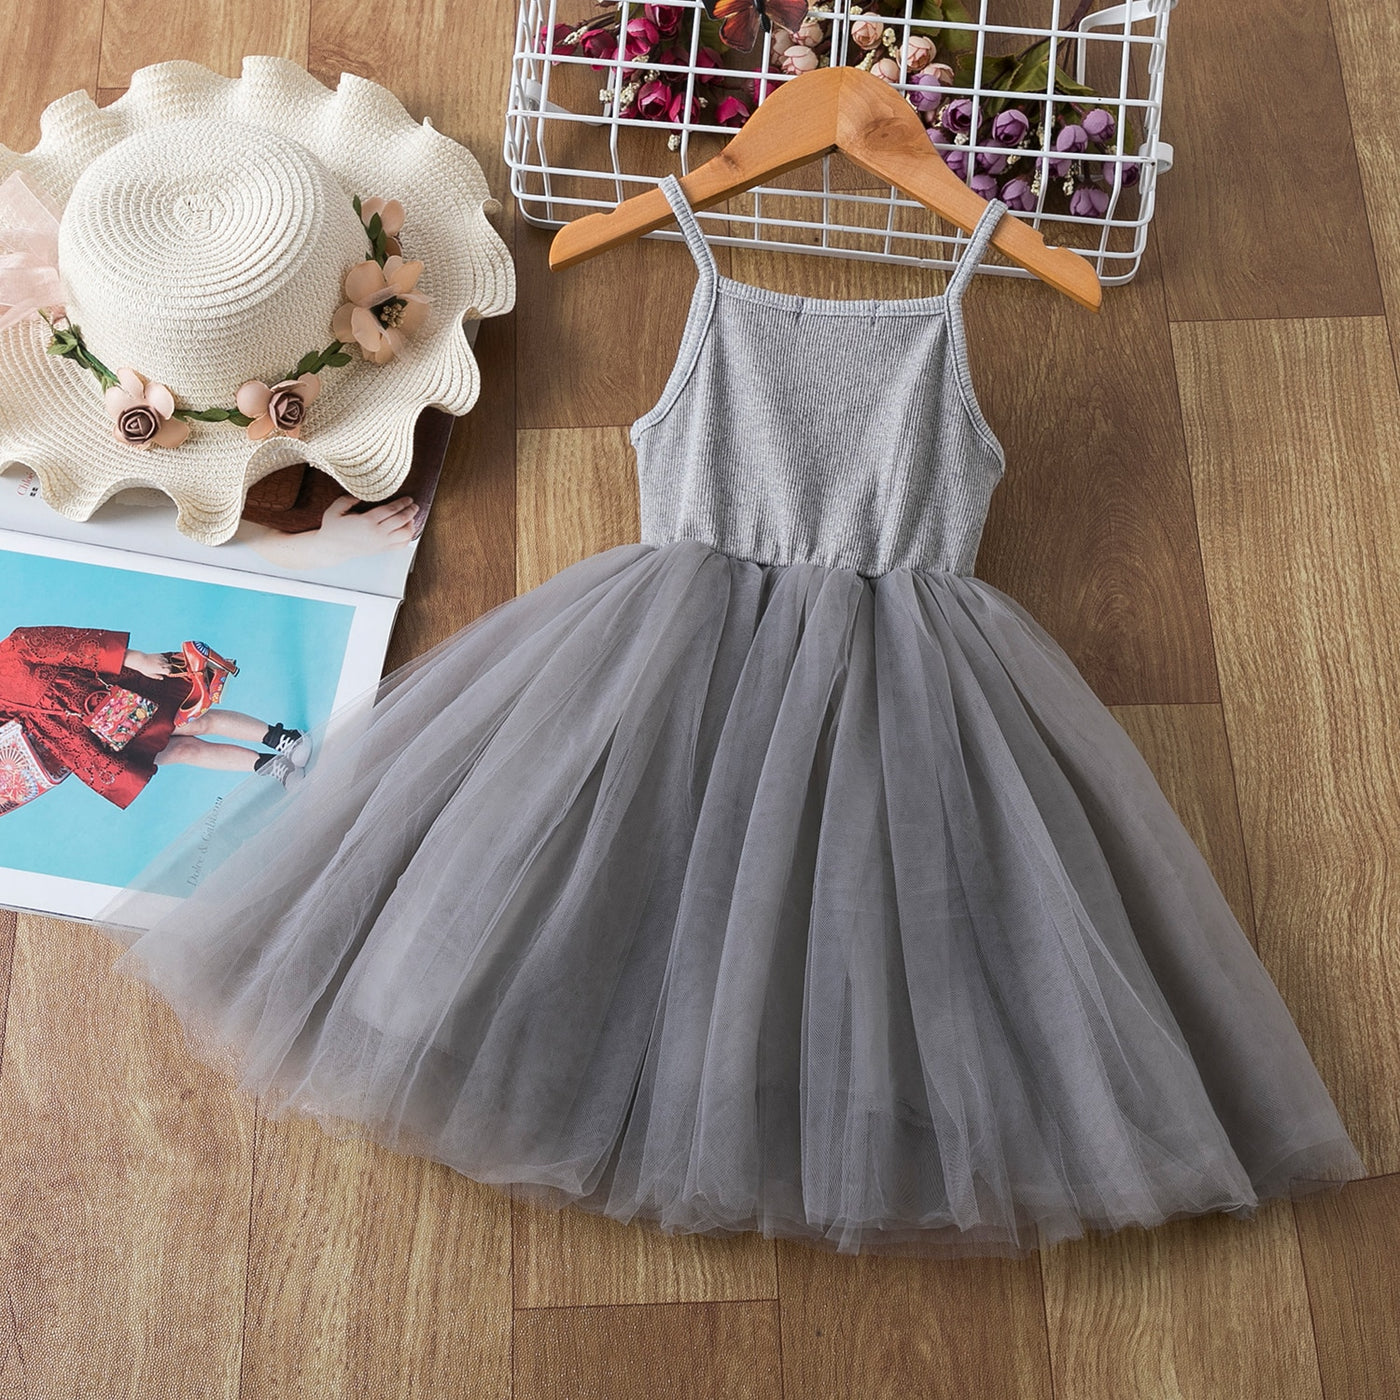 Tulle Fairy 3-8yrs Dress - Coco Potato - dresses and partywear for little girls